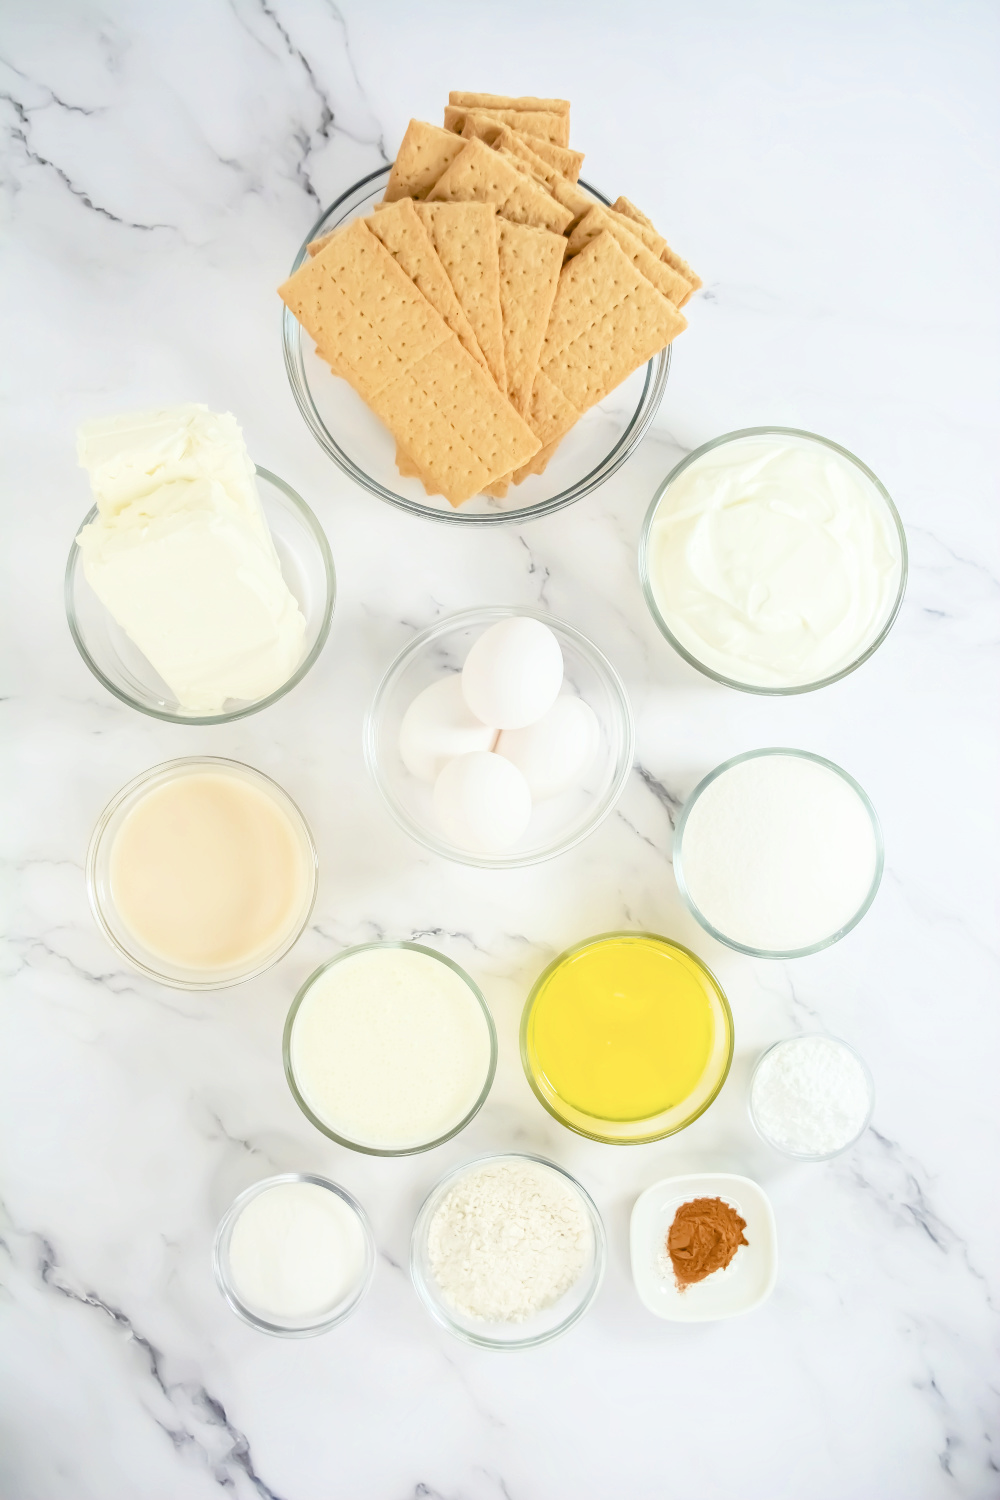 Overhead view of RumChata Cheesecake Ingredients in glass bowls.